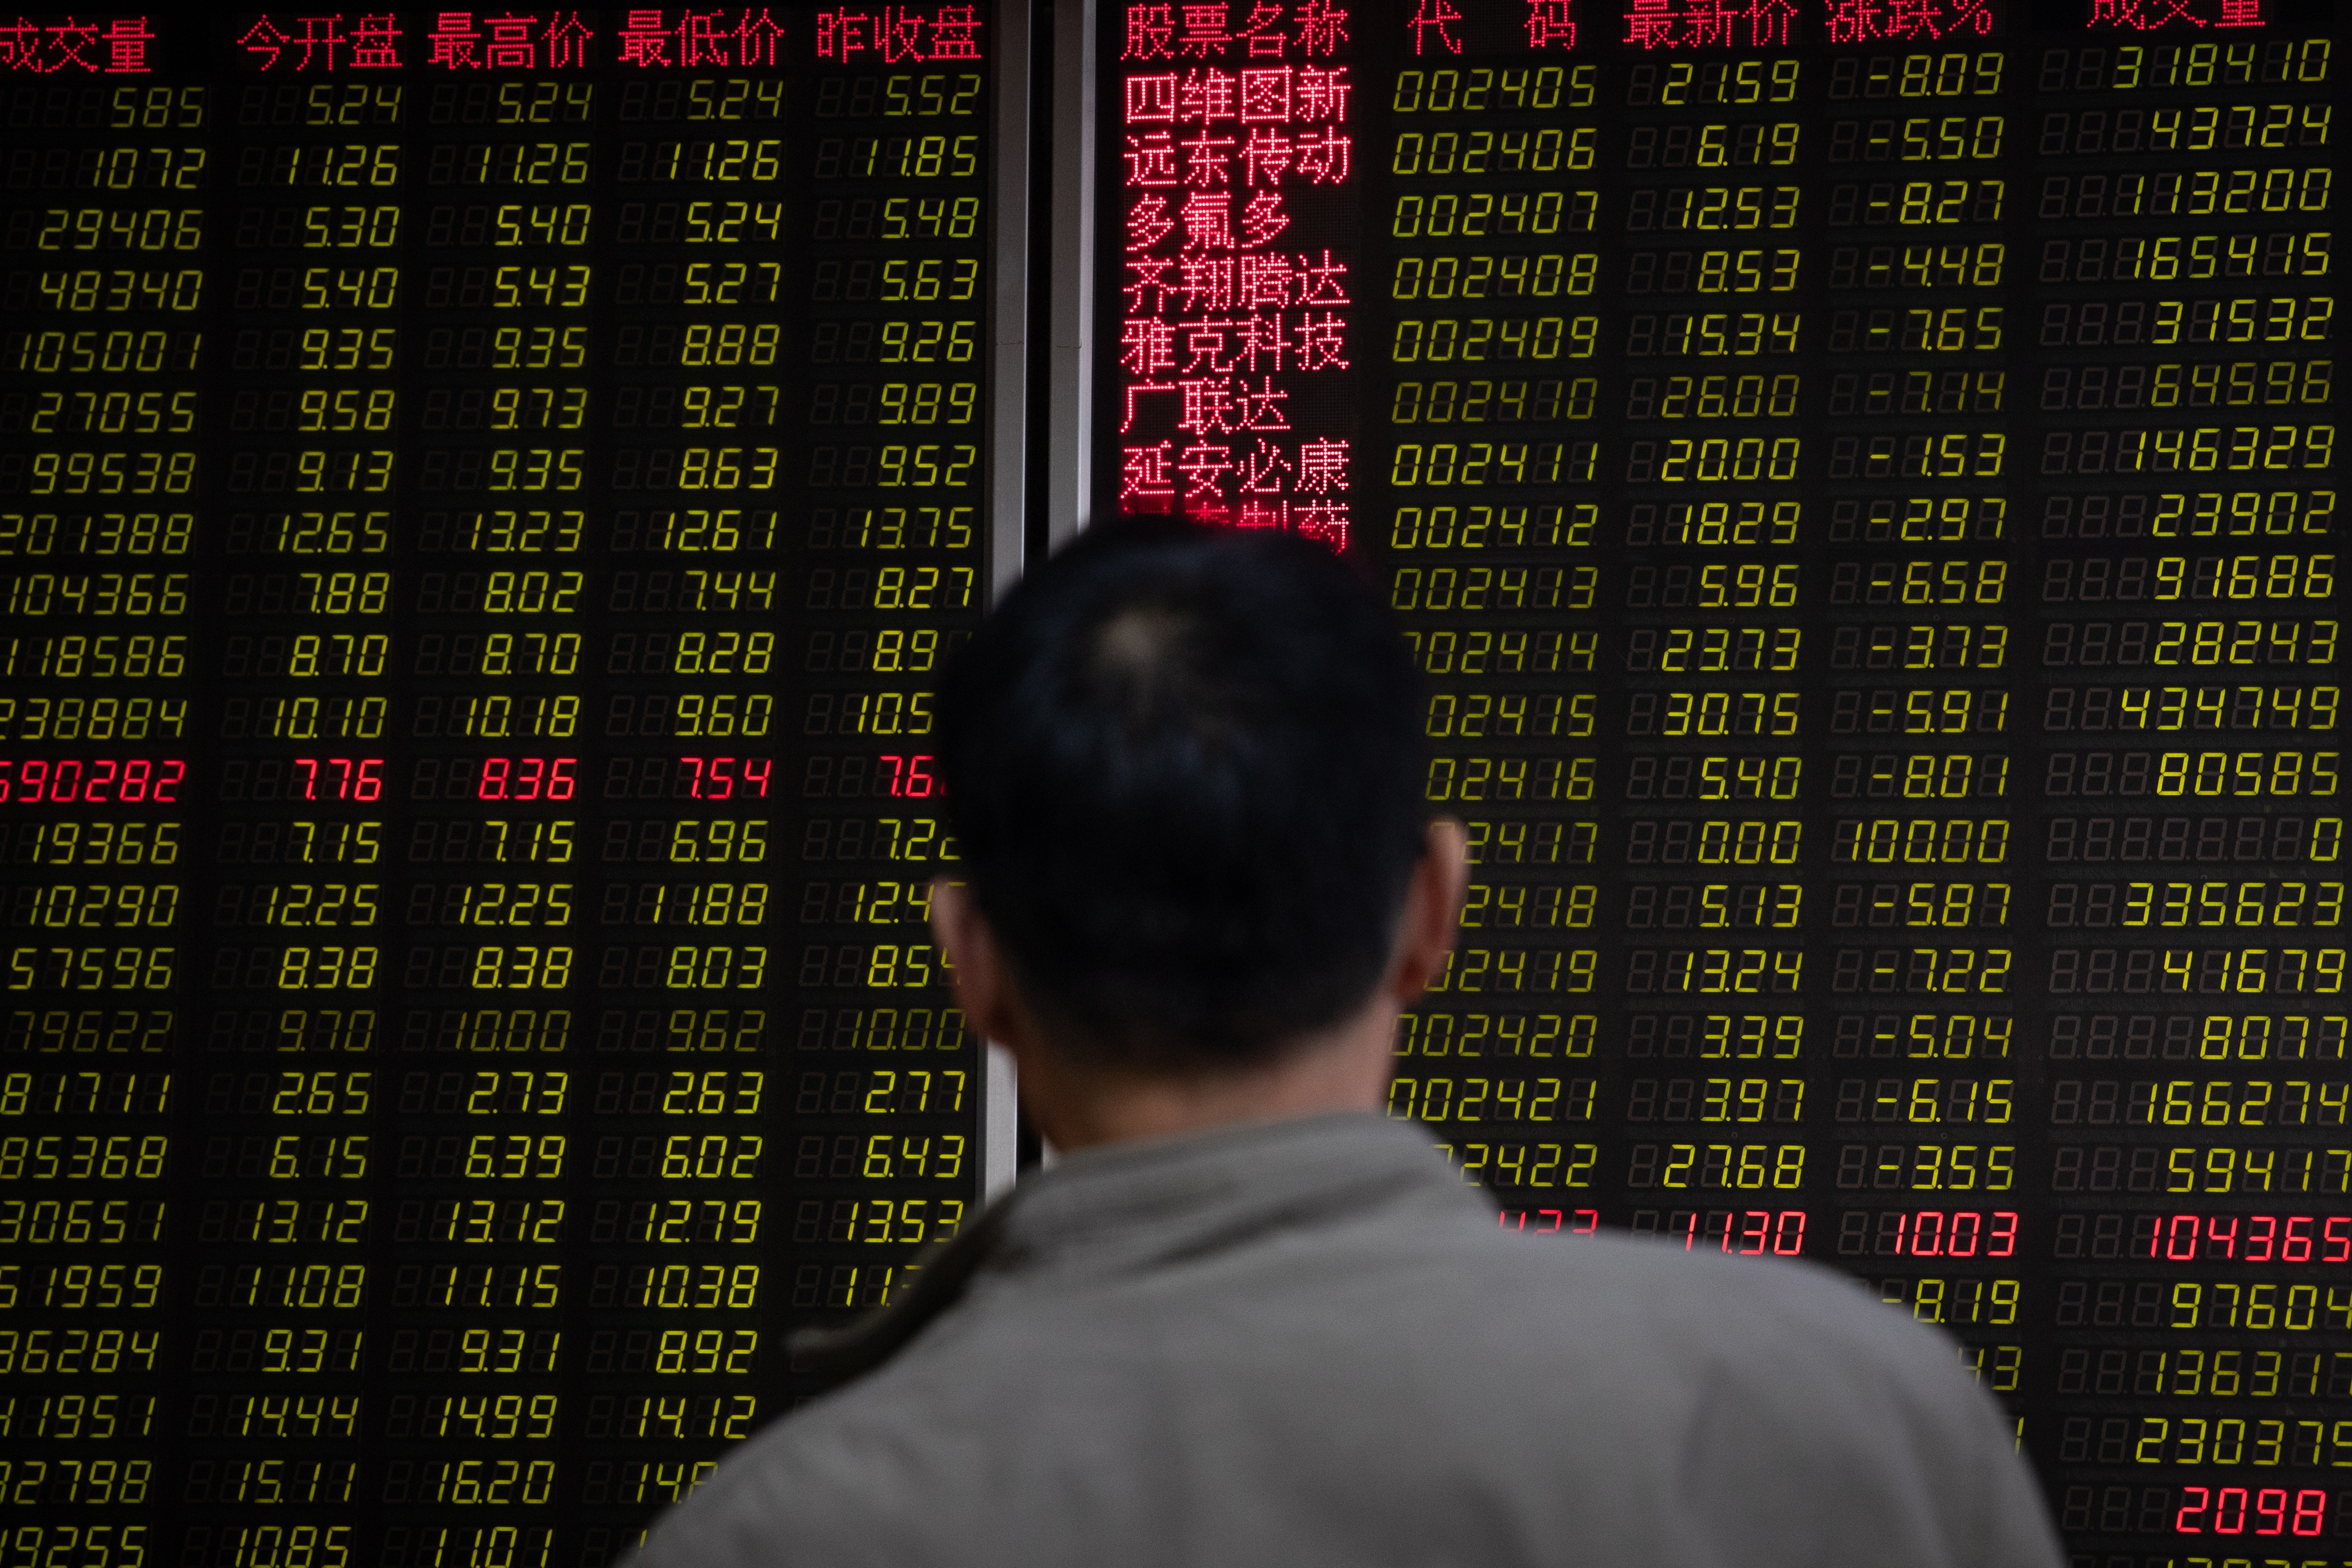 An electronic board displaying the stock index and prices at a securities brokerage in Beijing, on 6 May 2019. Contrary to global conventions, China’s stock market represents losses and declines in green, and uses red to illustrate gains and advances. Photo: EPA-EFE